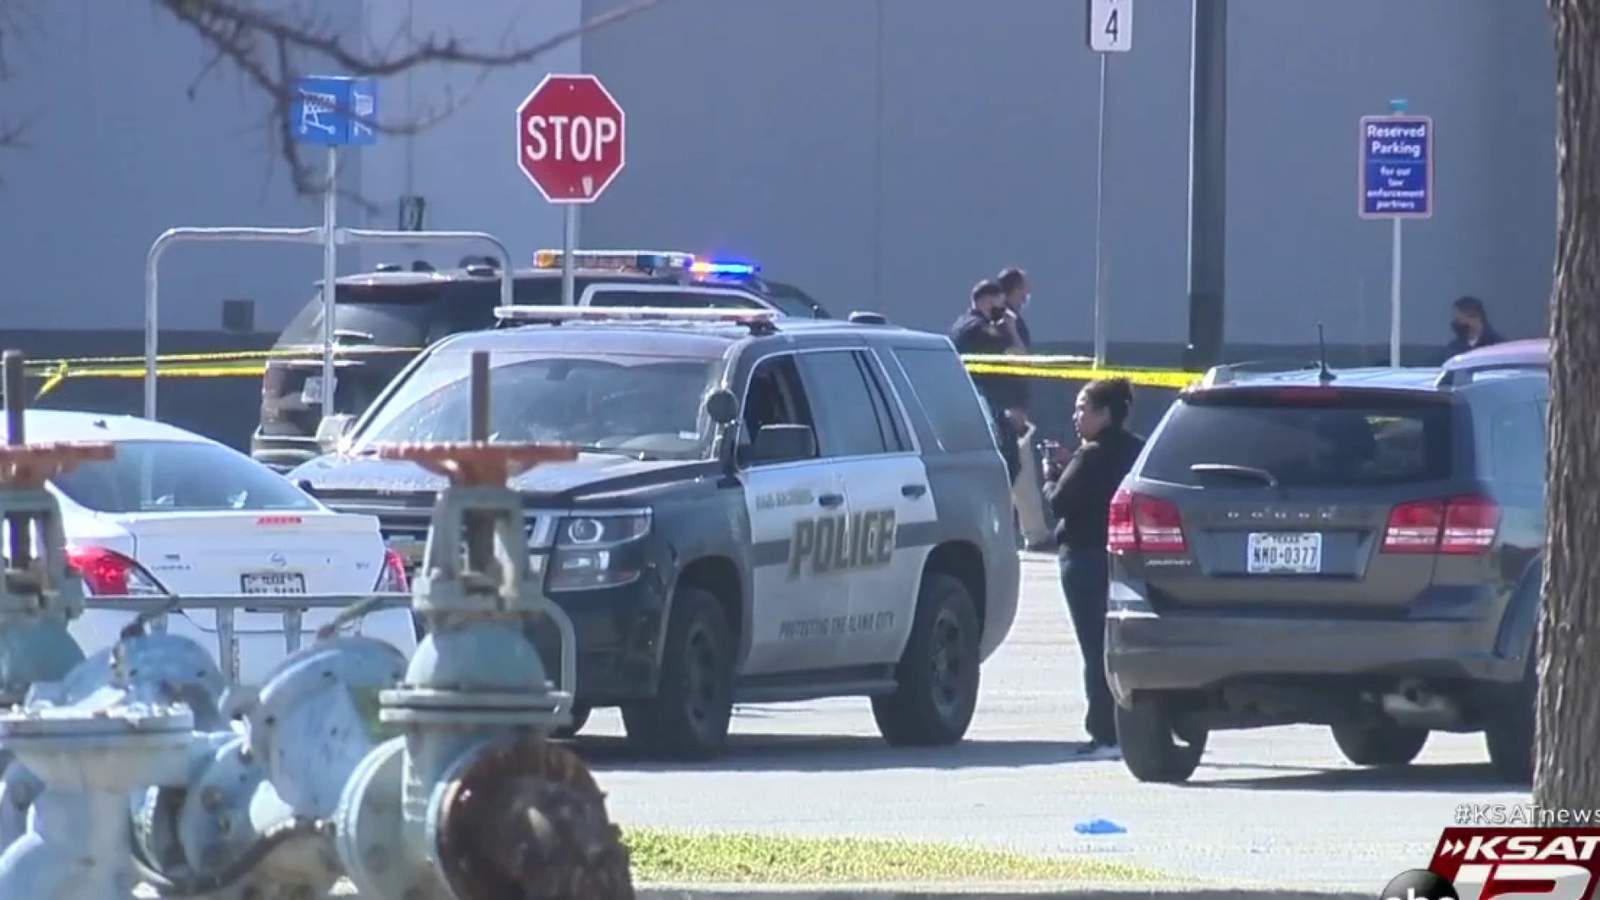 San Antonio police are investigating the shootings on the West Side Walmart